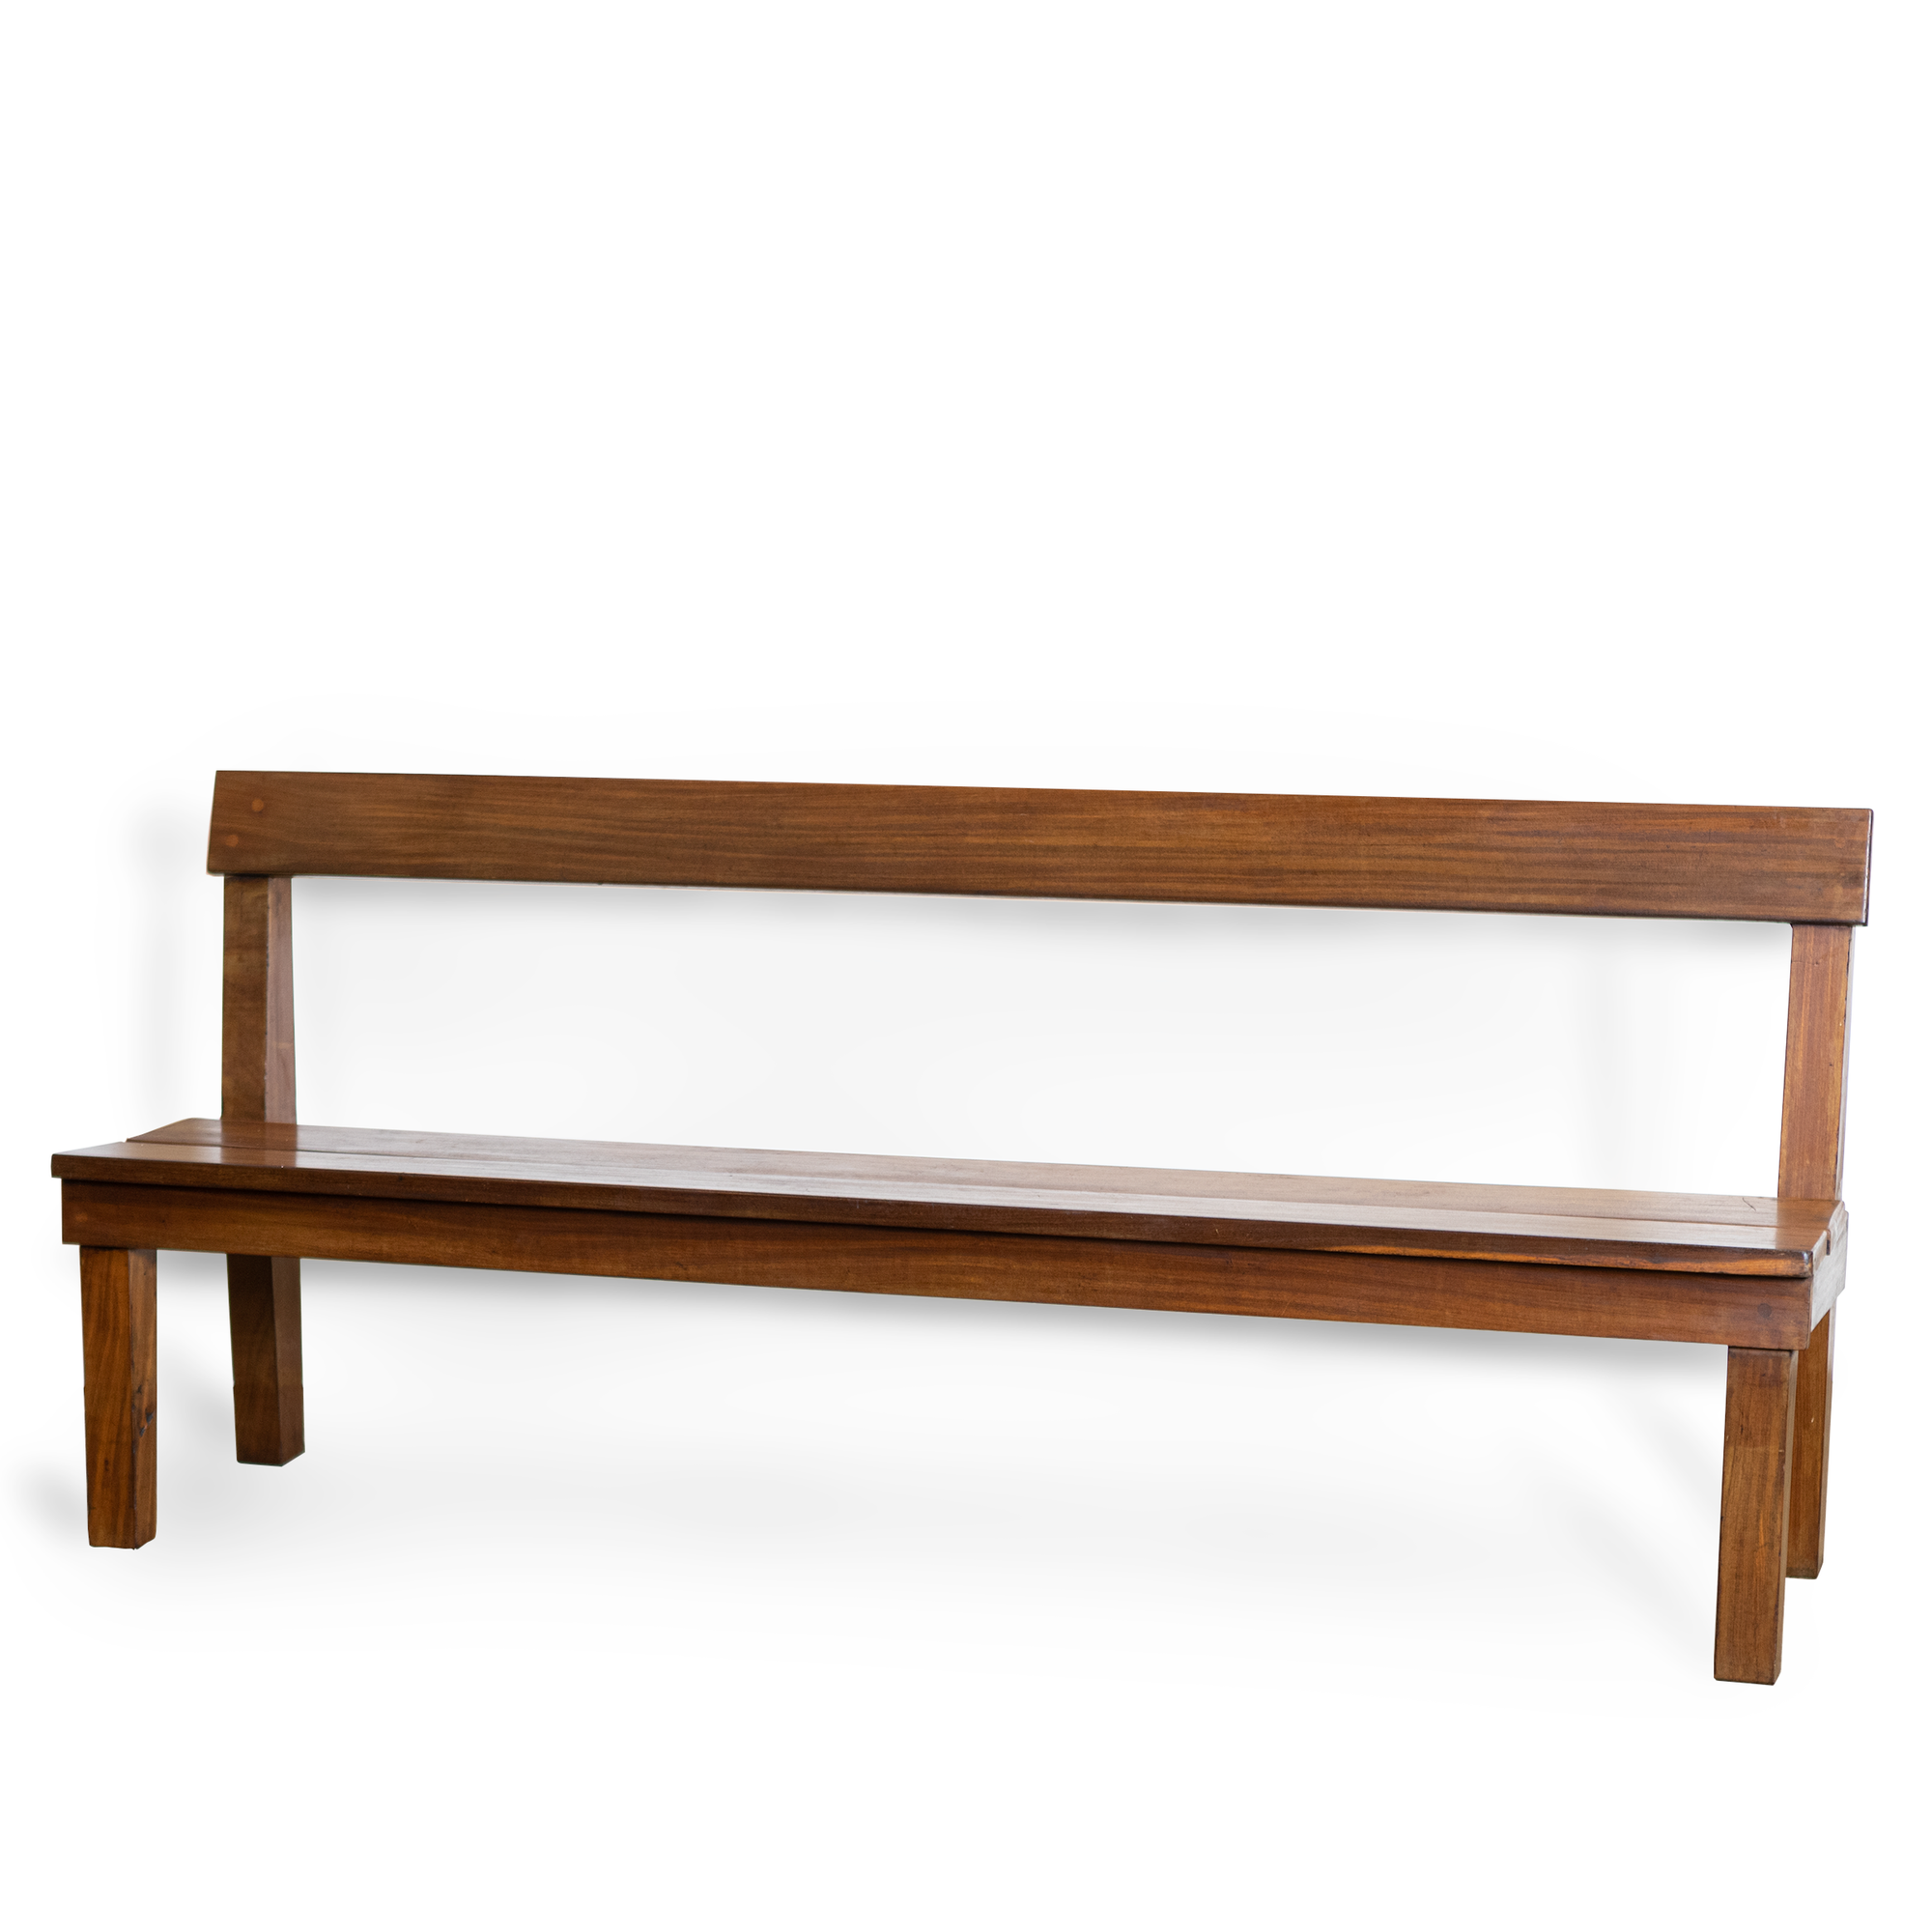 Reclaimed Solid Teak Bench Seat | The Architectural Forum